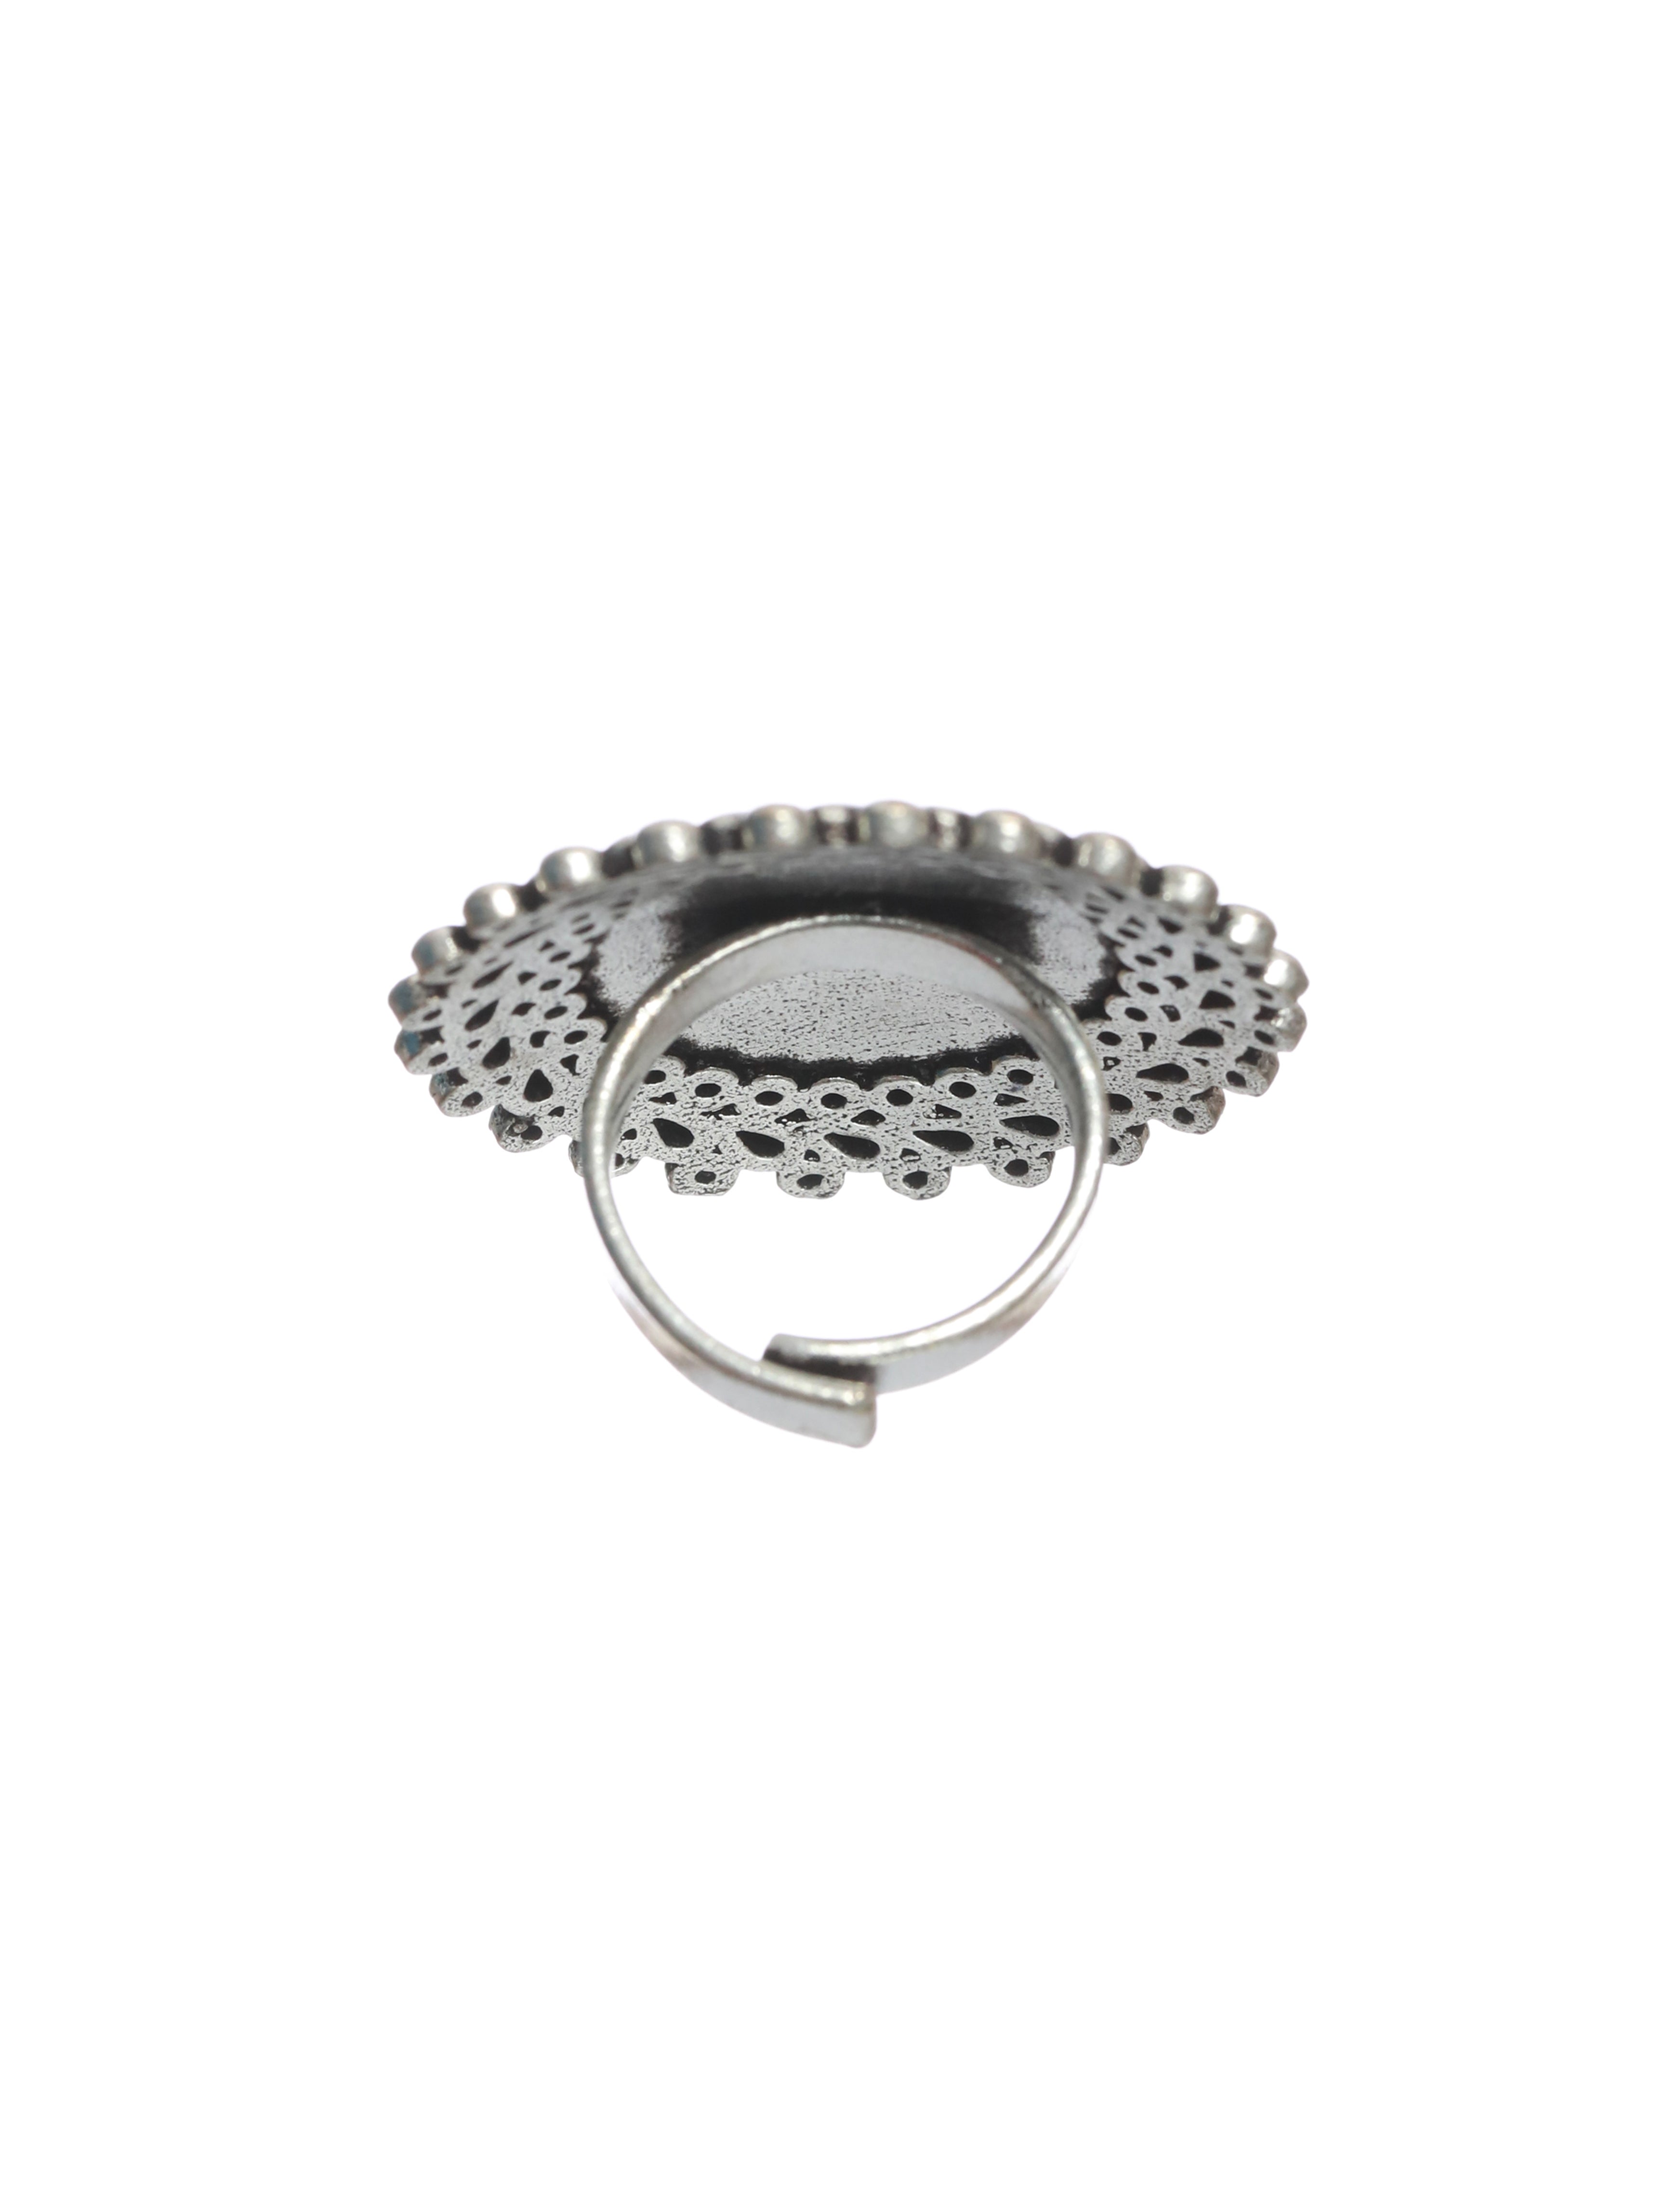 Oxidised Lotus-Shaped Silver-Plated Adjustable Handcrafted Finger Ring